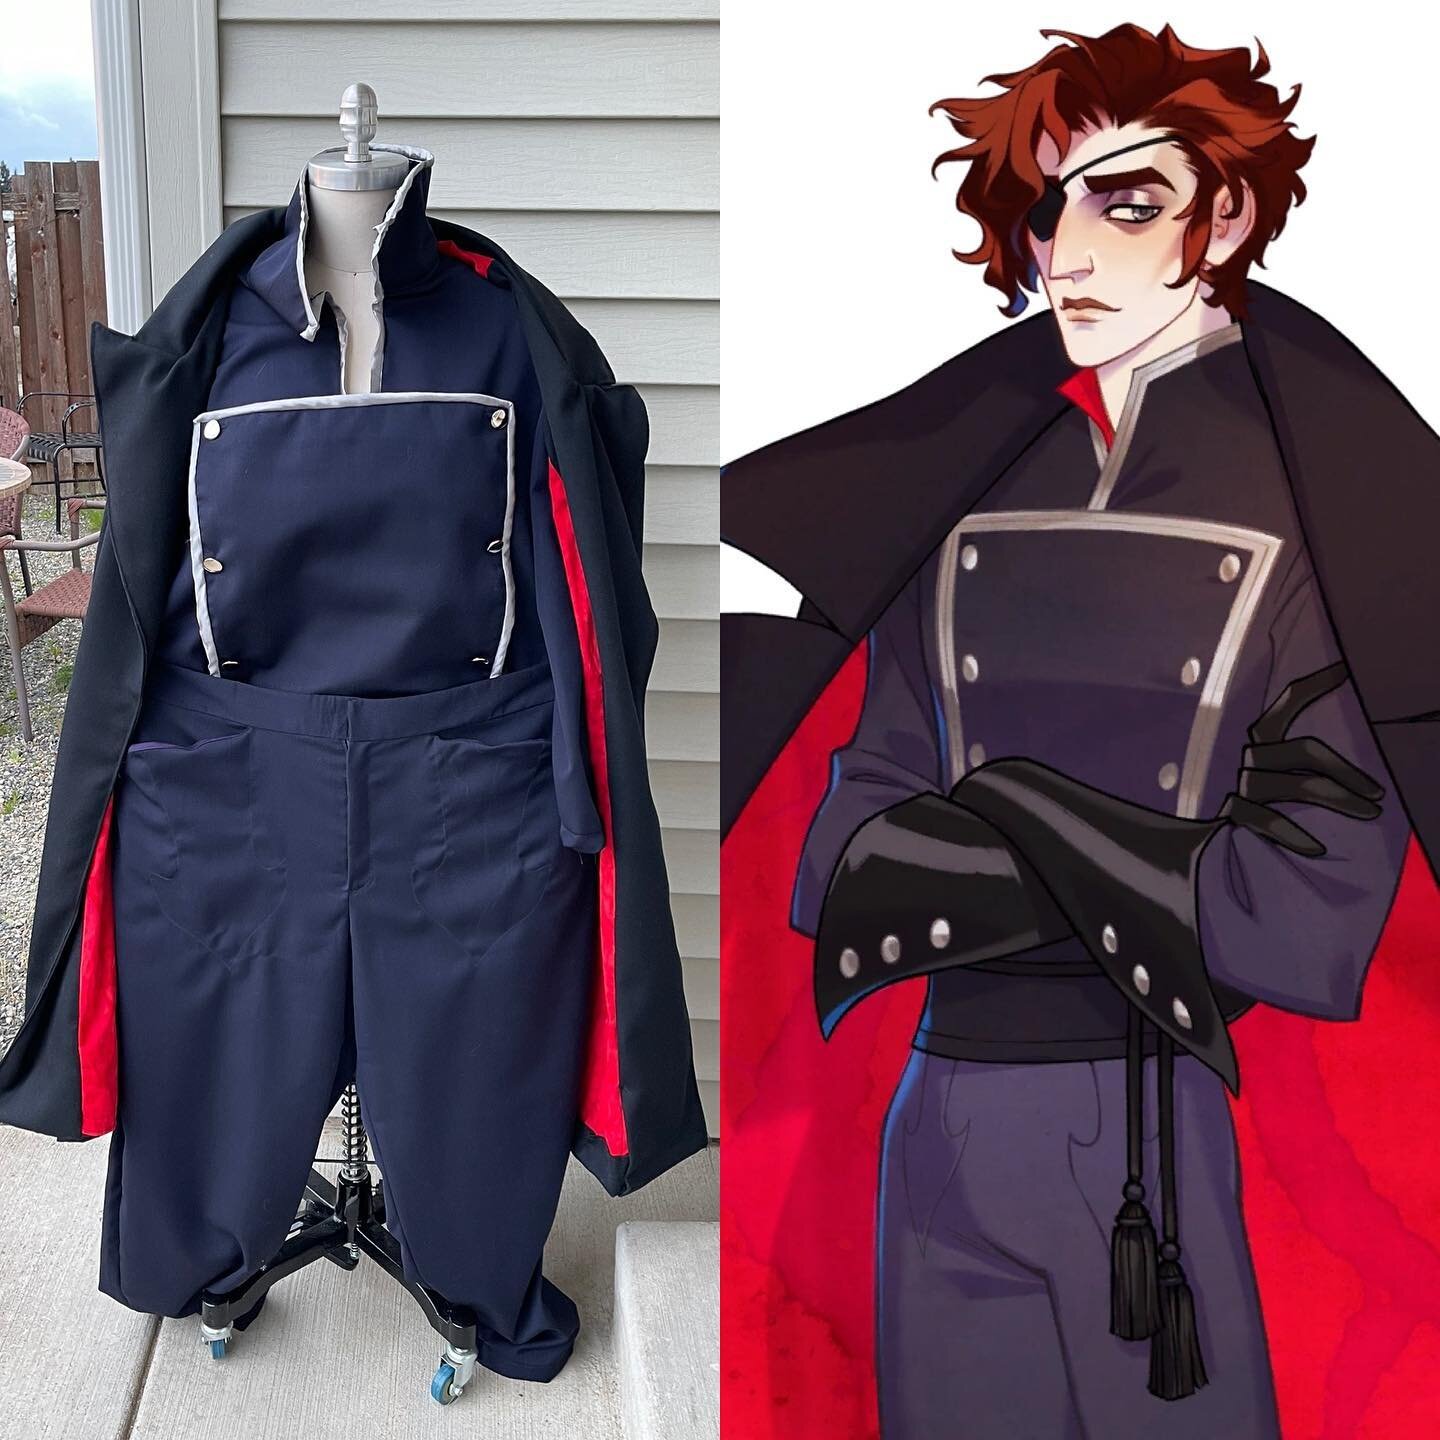 I don&rsquo;t have the proper mannequin to really show it off but I just finished this Julian Devorak cosplay commission
.
.
.
#cosplay #cosplaycommission #juliandevorak #juliandevorakcosplay #thearcana #thearcanacosplay #plussizecosplay